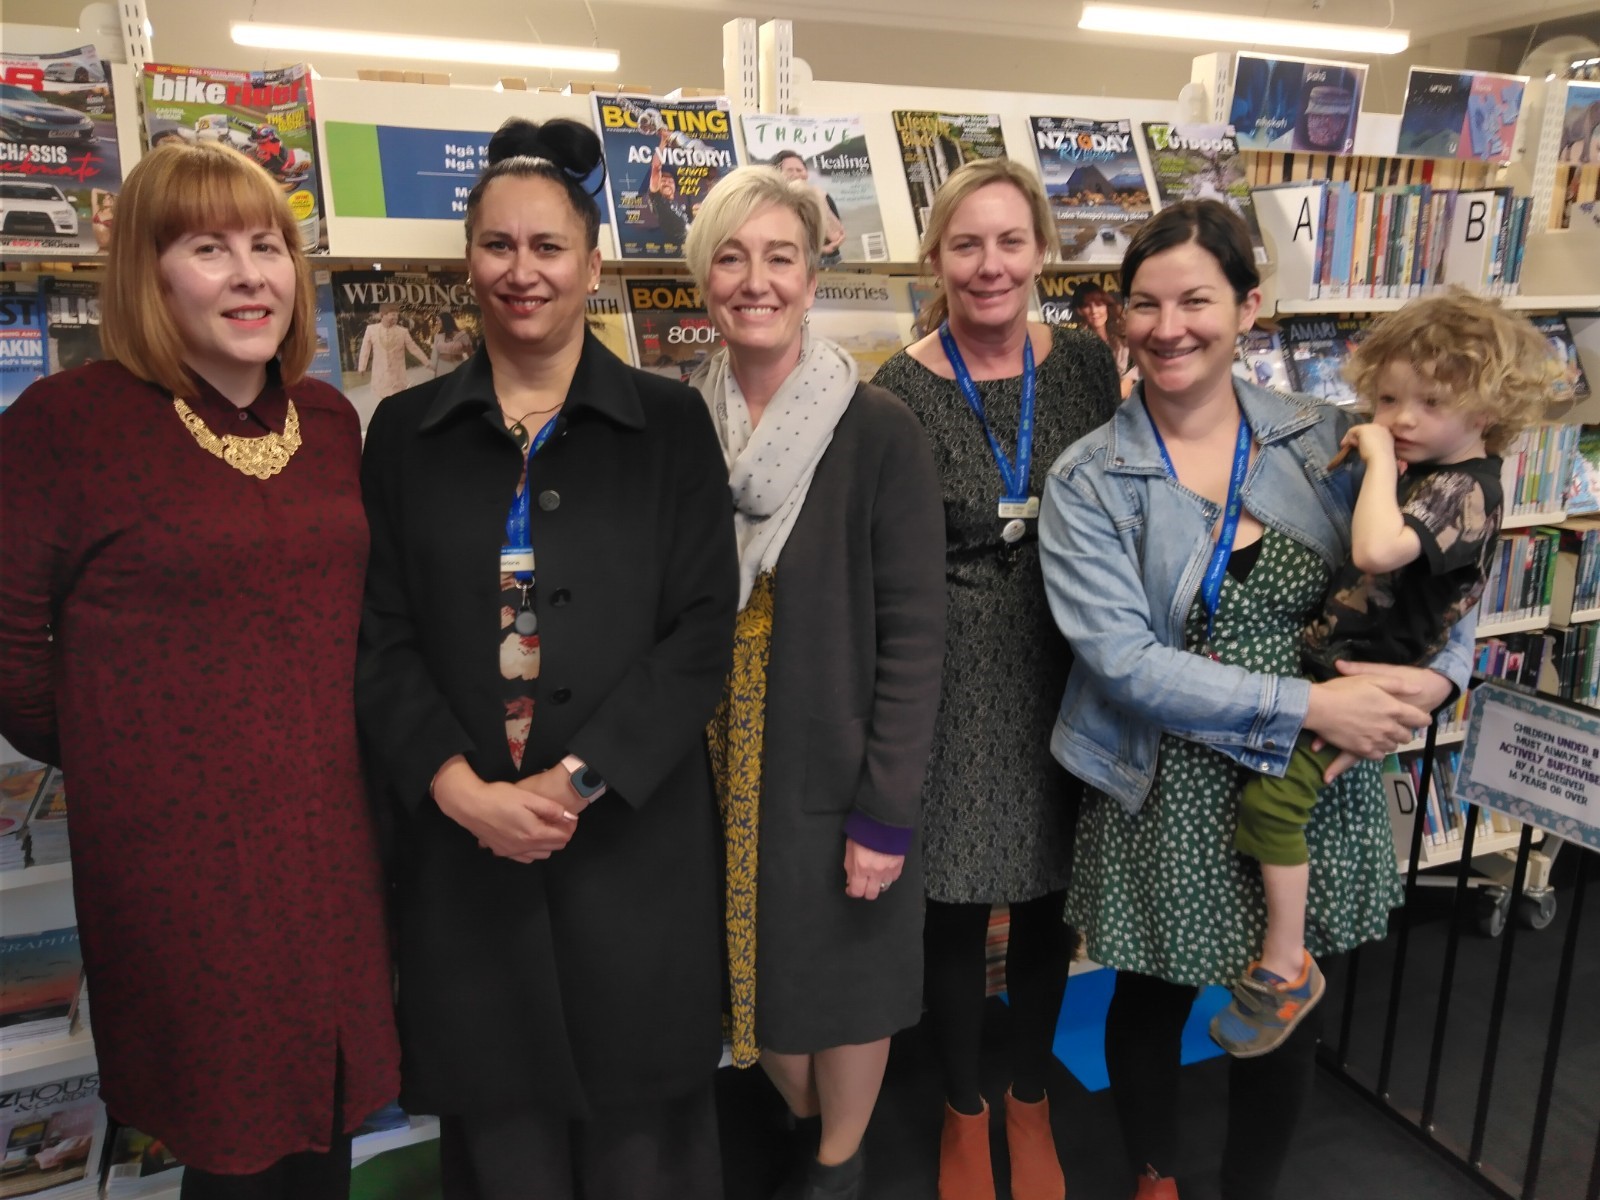 Councillor Erin Wilson-Collins, Darlene Lang (General Manager Customer Experience), Louise Miller (Chief Executive), Lisa Salter (Library Manager), Paula Guy-Stuve (Project Manager) and Finn Stuve at the reopening